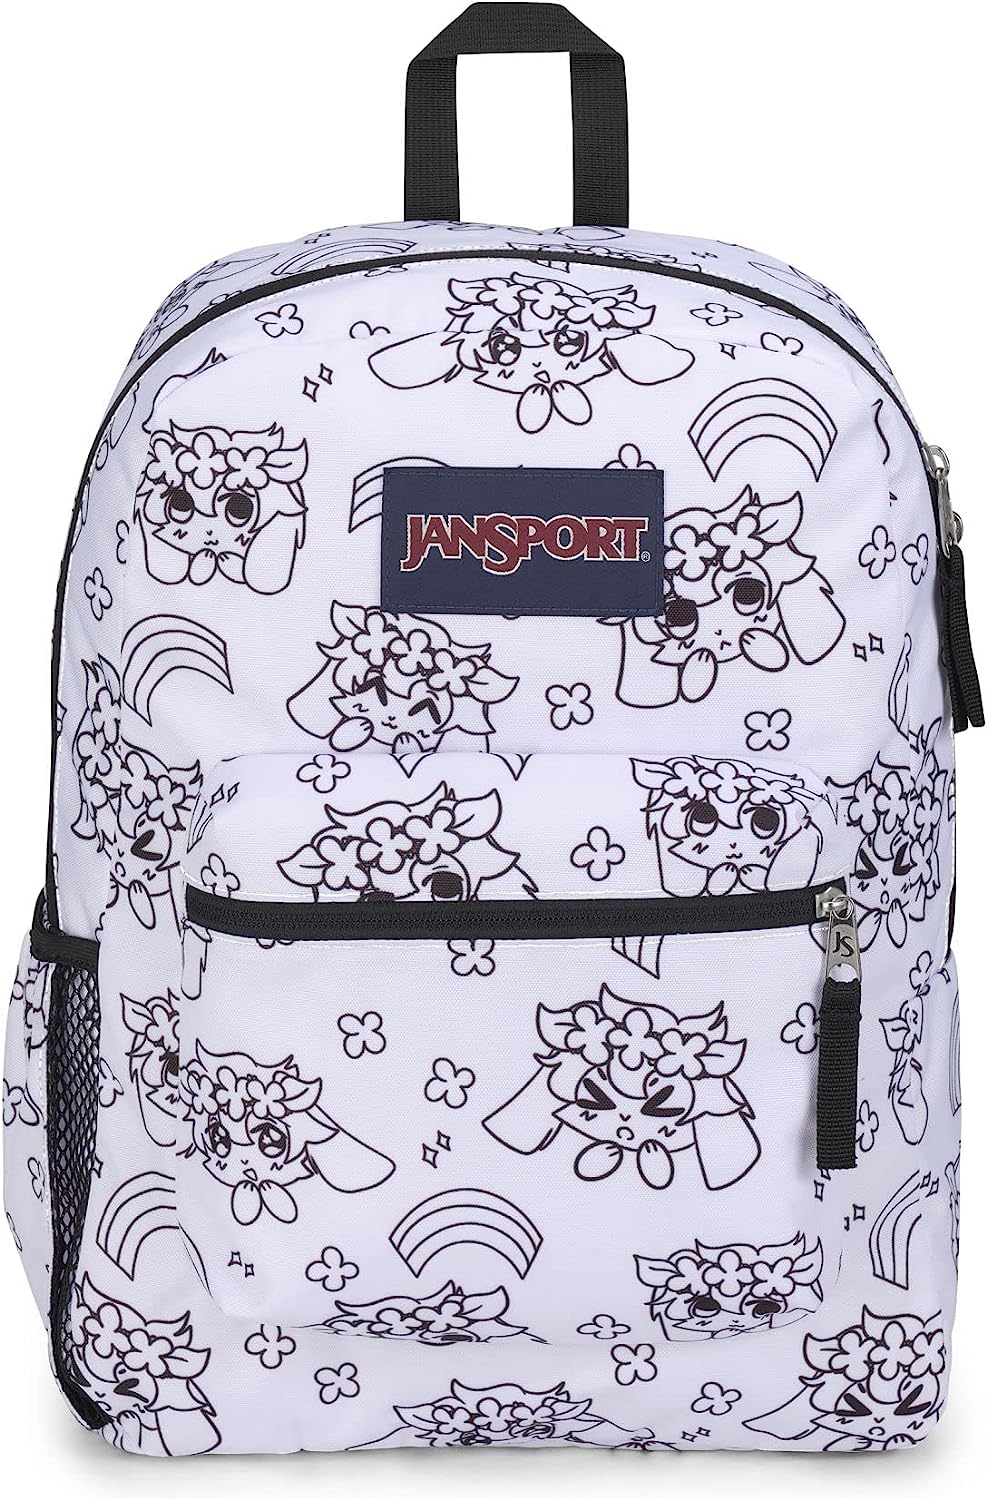 JanSport Backpack Cross Town Anime Emotions